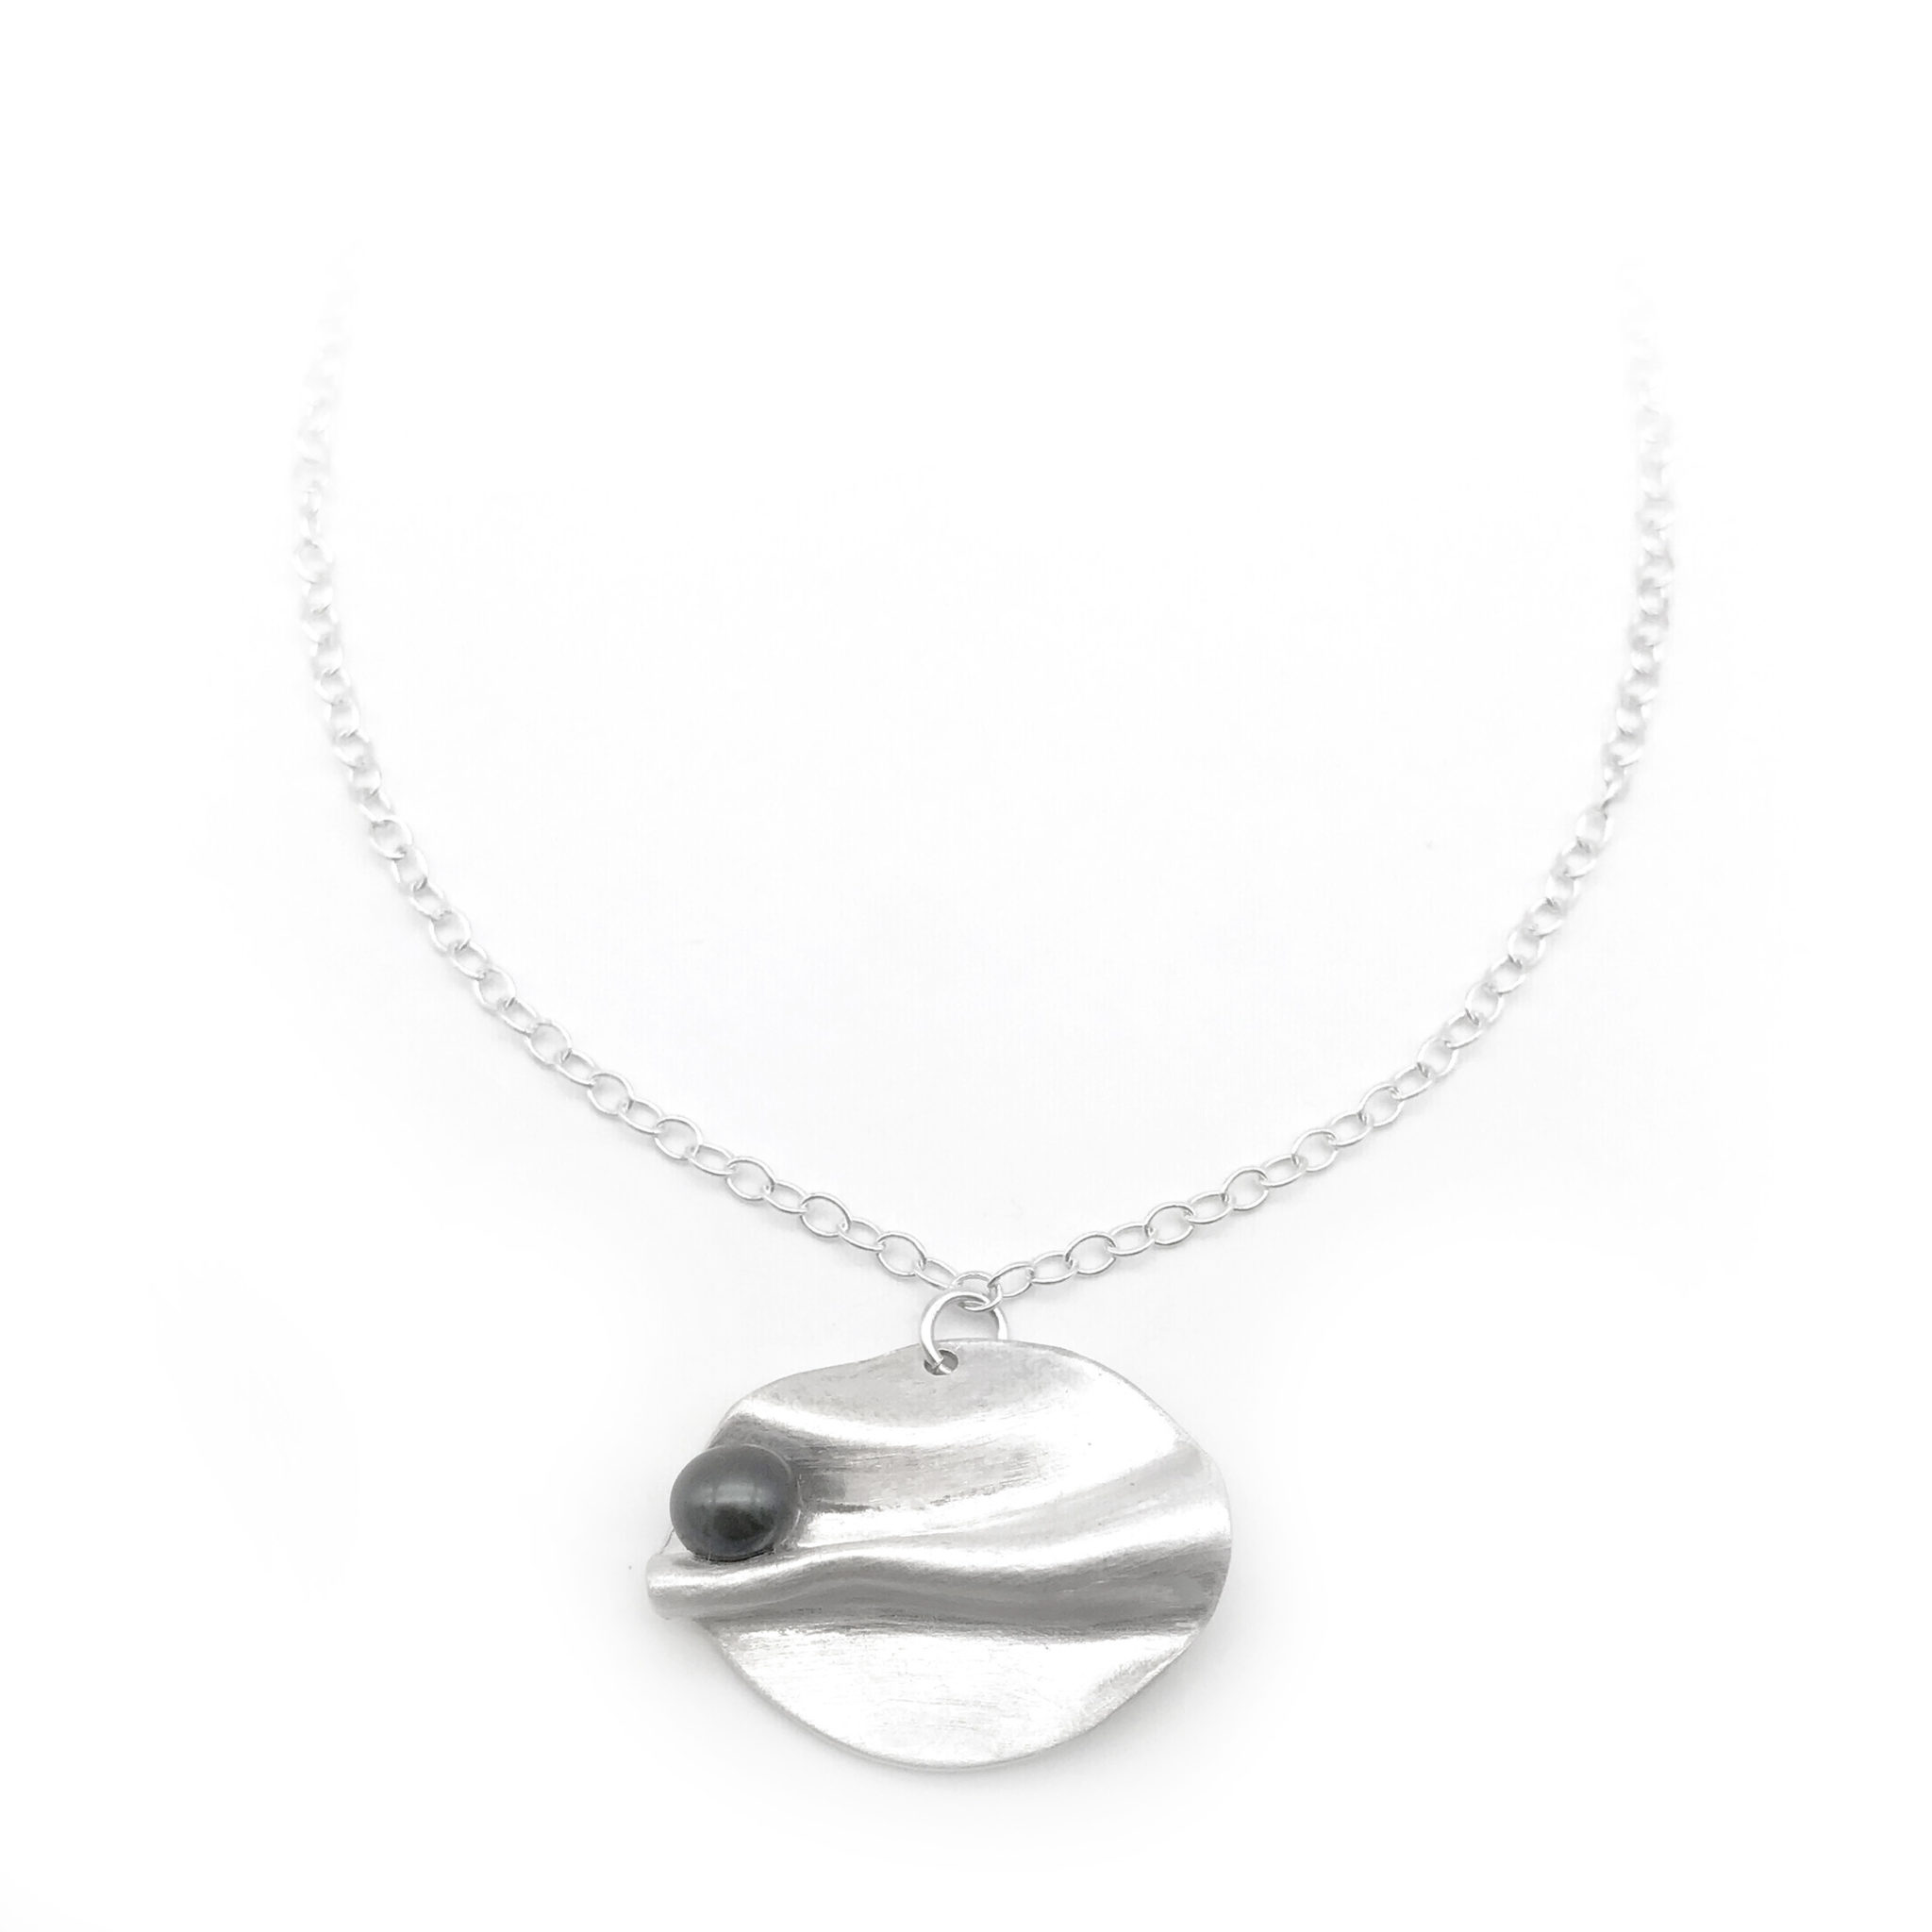 Silver Fold Form Pearl Necklace - Aries Artistic Jewelry